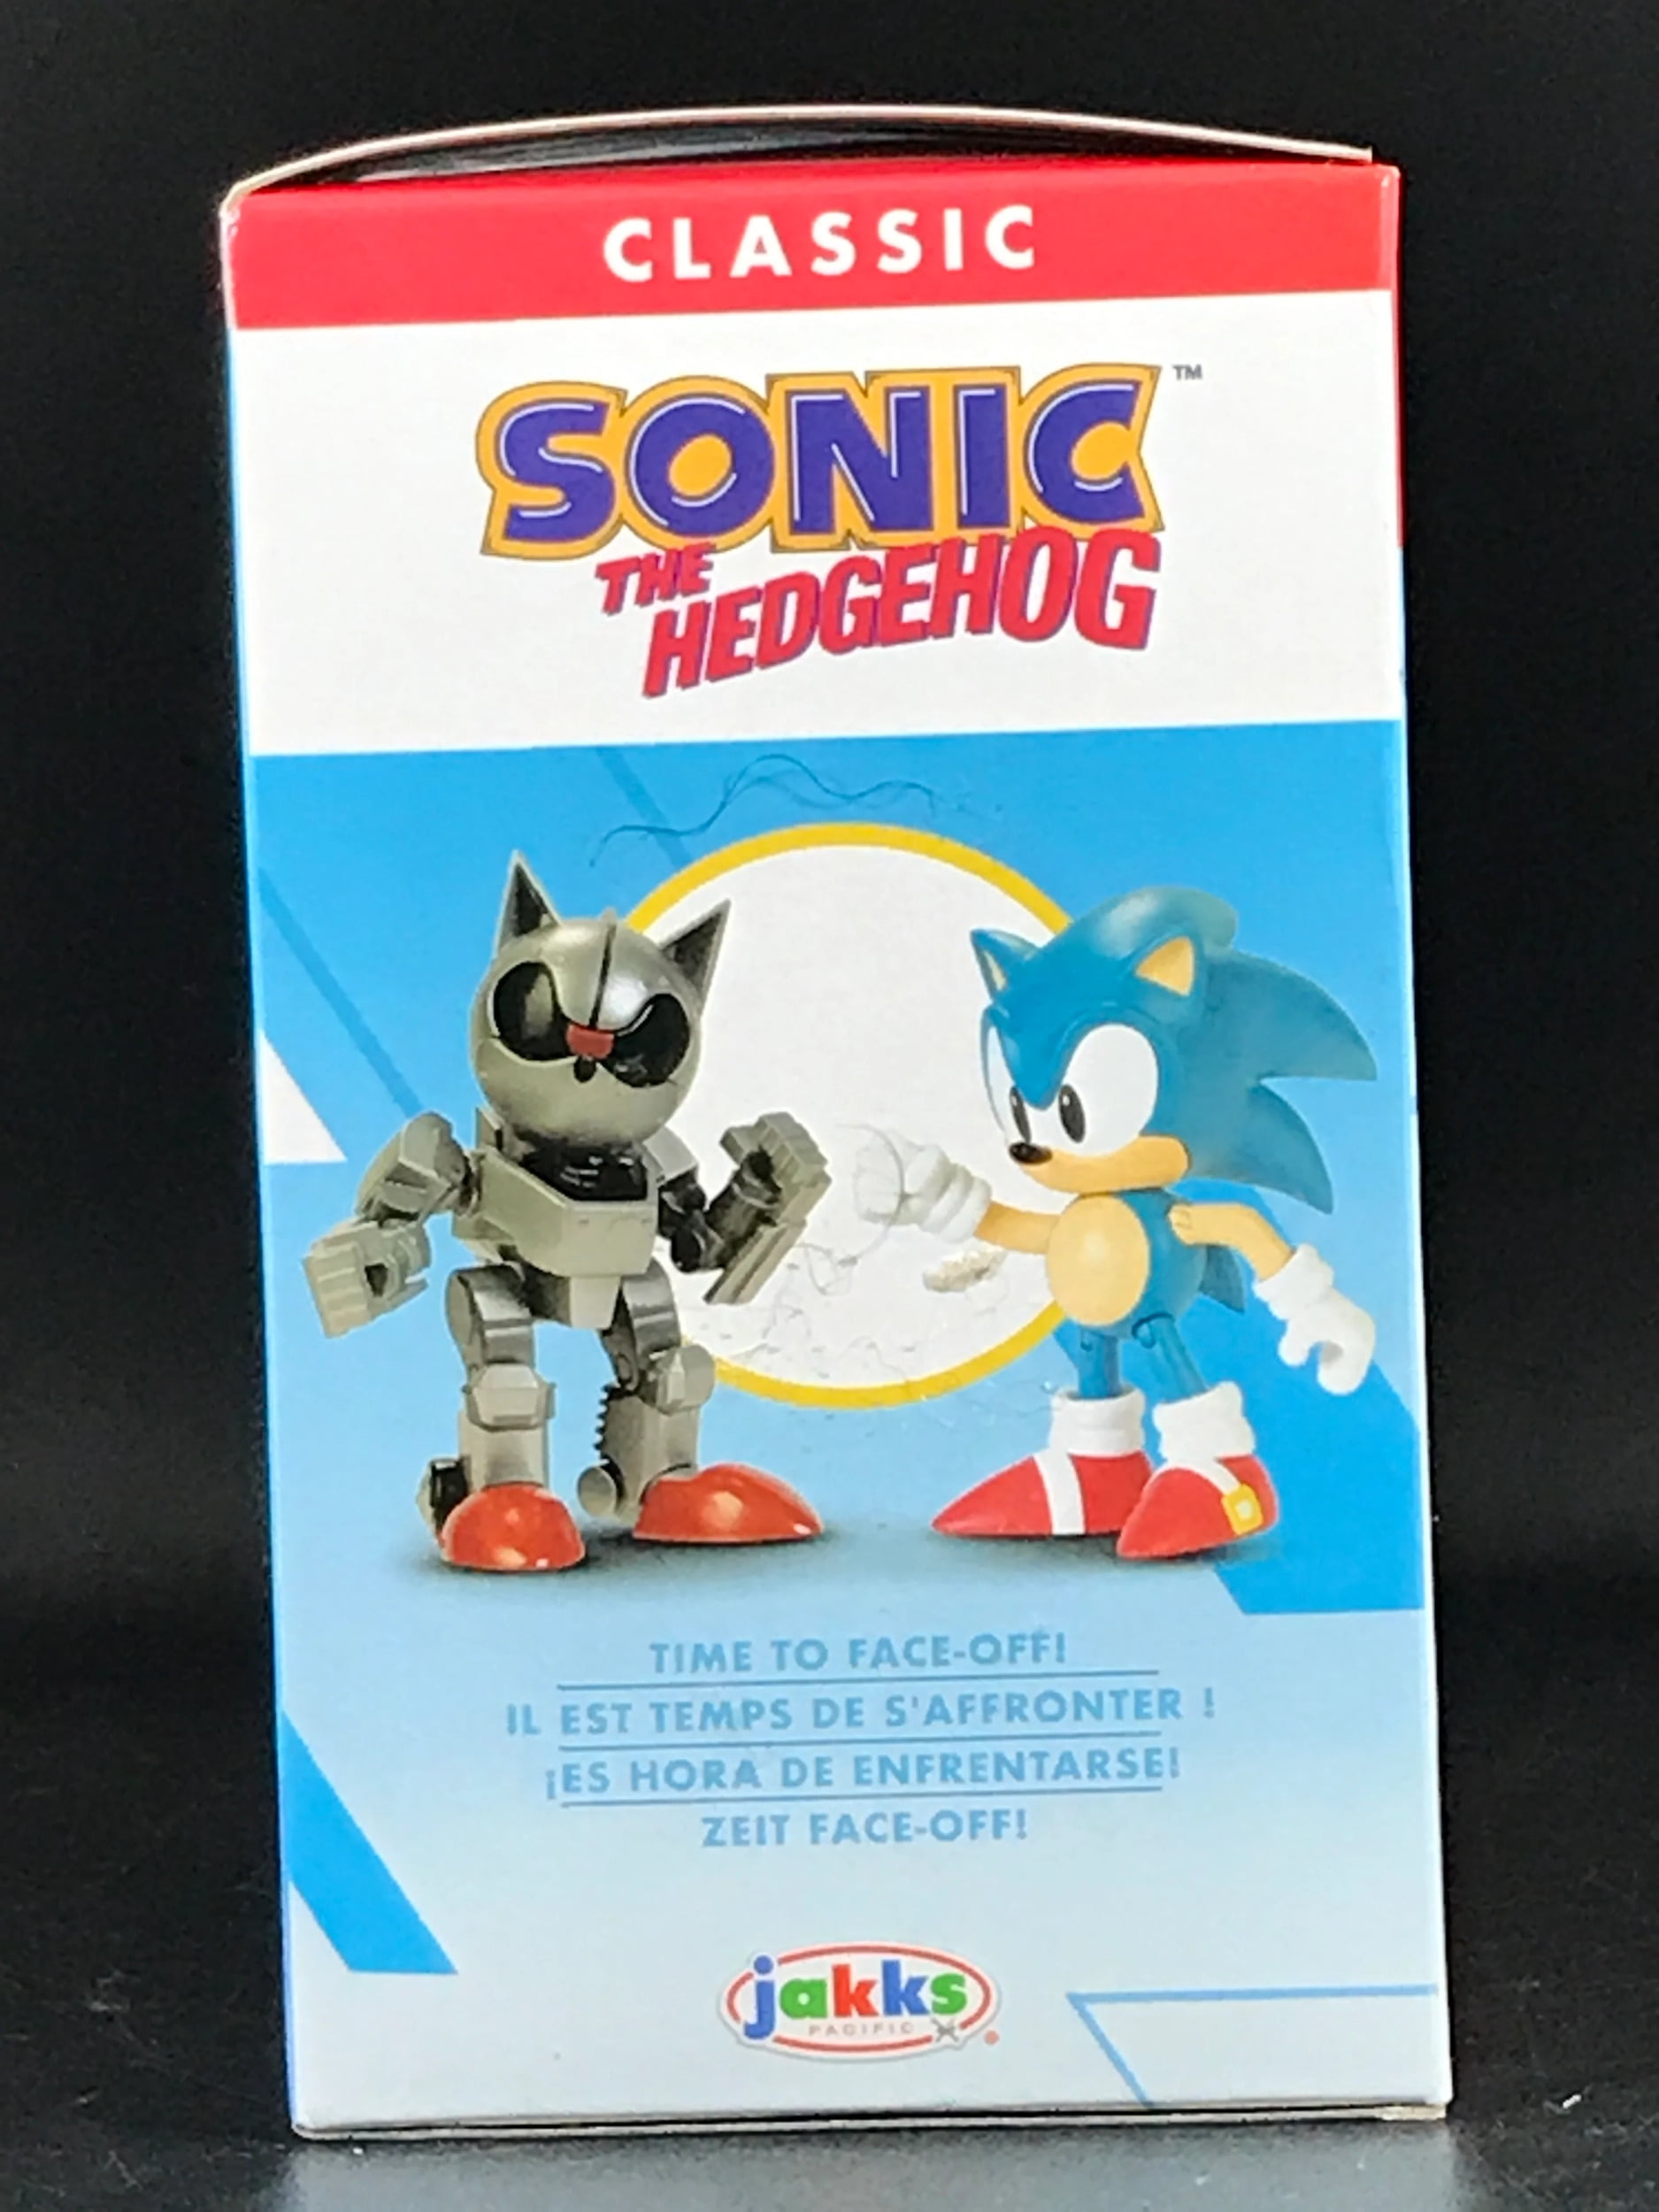 So, what's the deal with Mecha Sonic in terms of the Classic